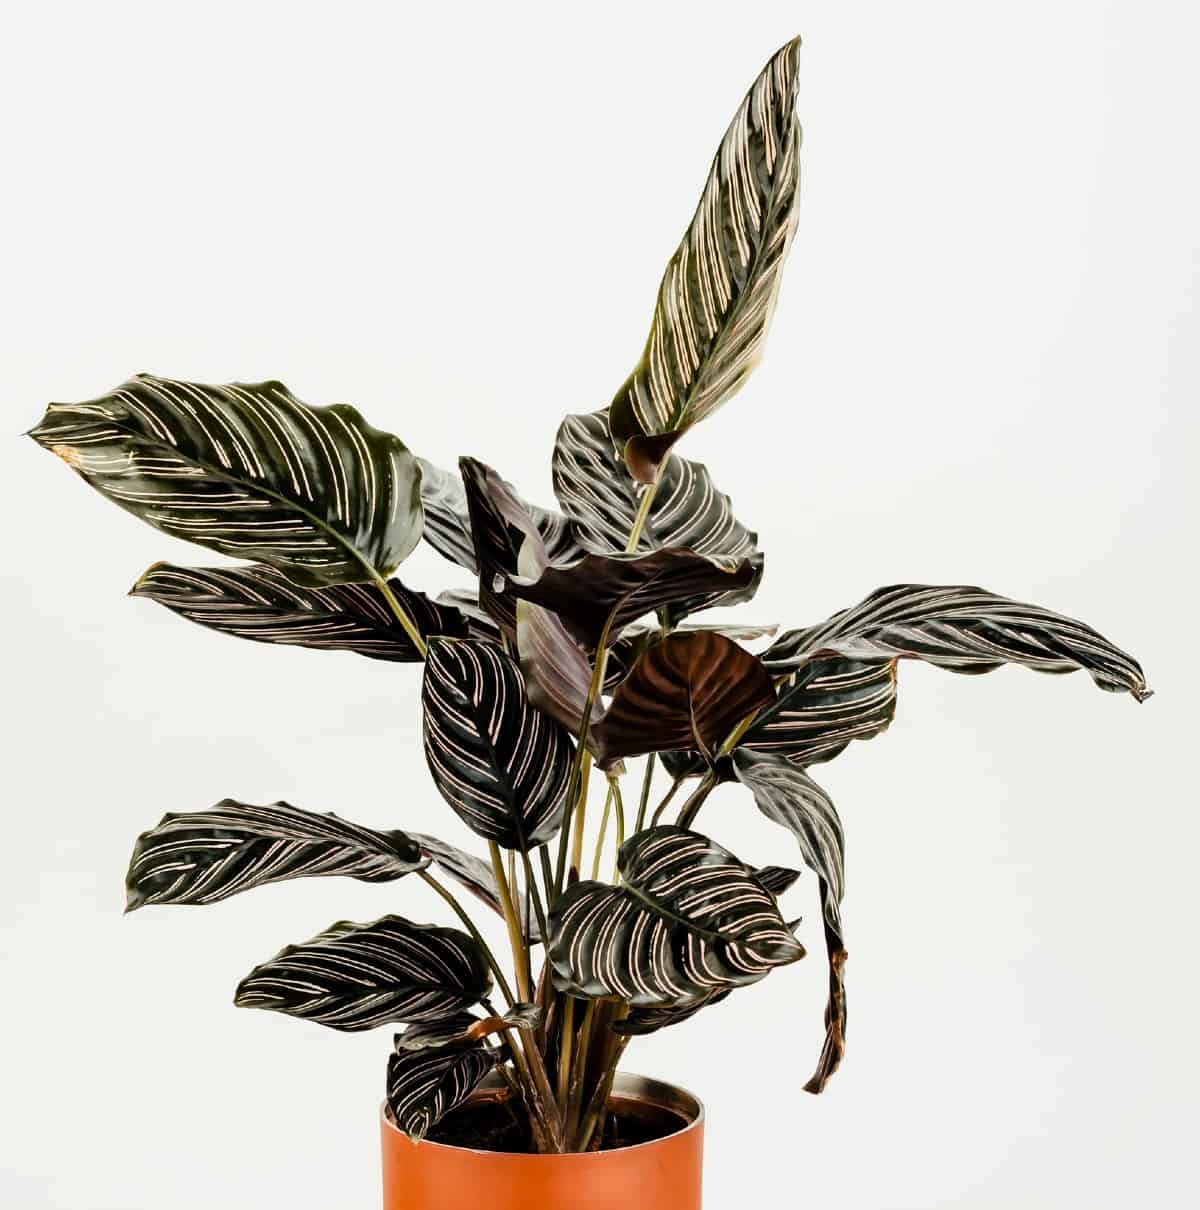 the prayer plant is easy to grow in a pot